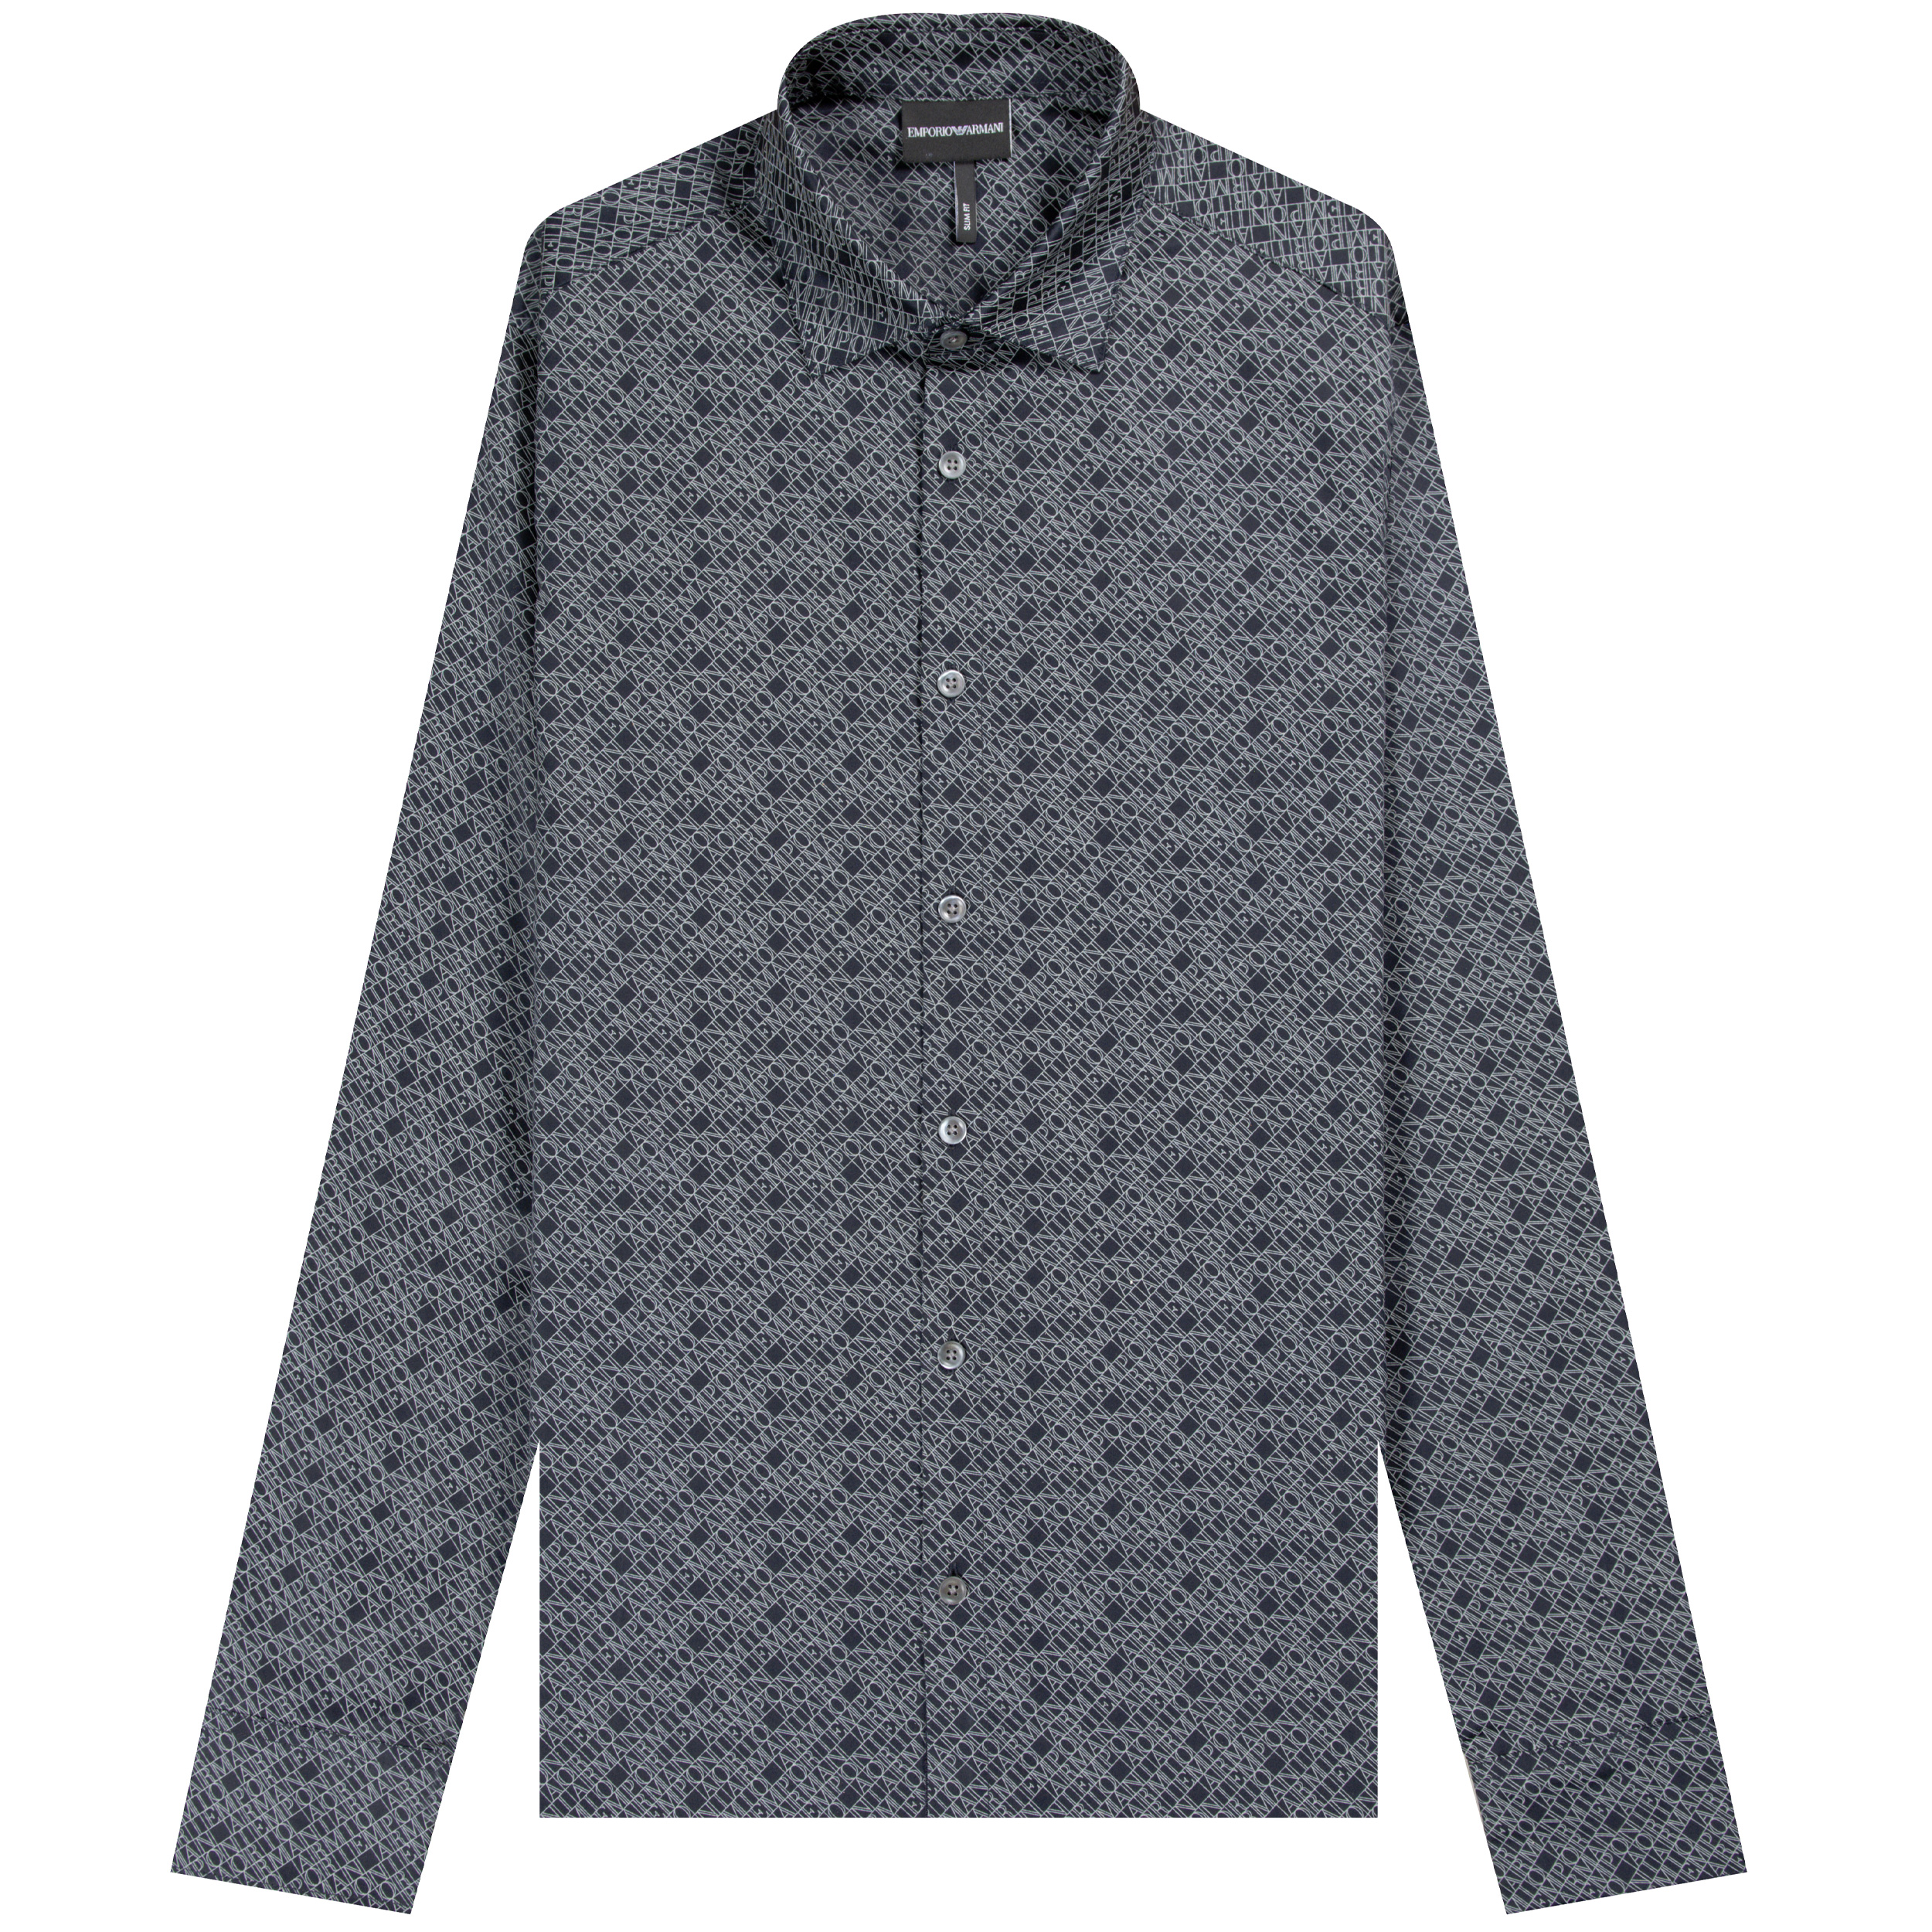 Emporio Armani ’All Over Micro Lettering’ Shirt Navy/White